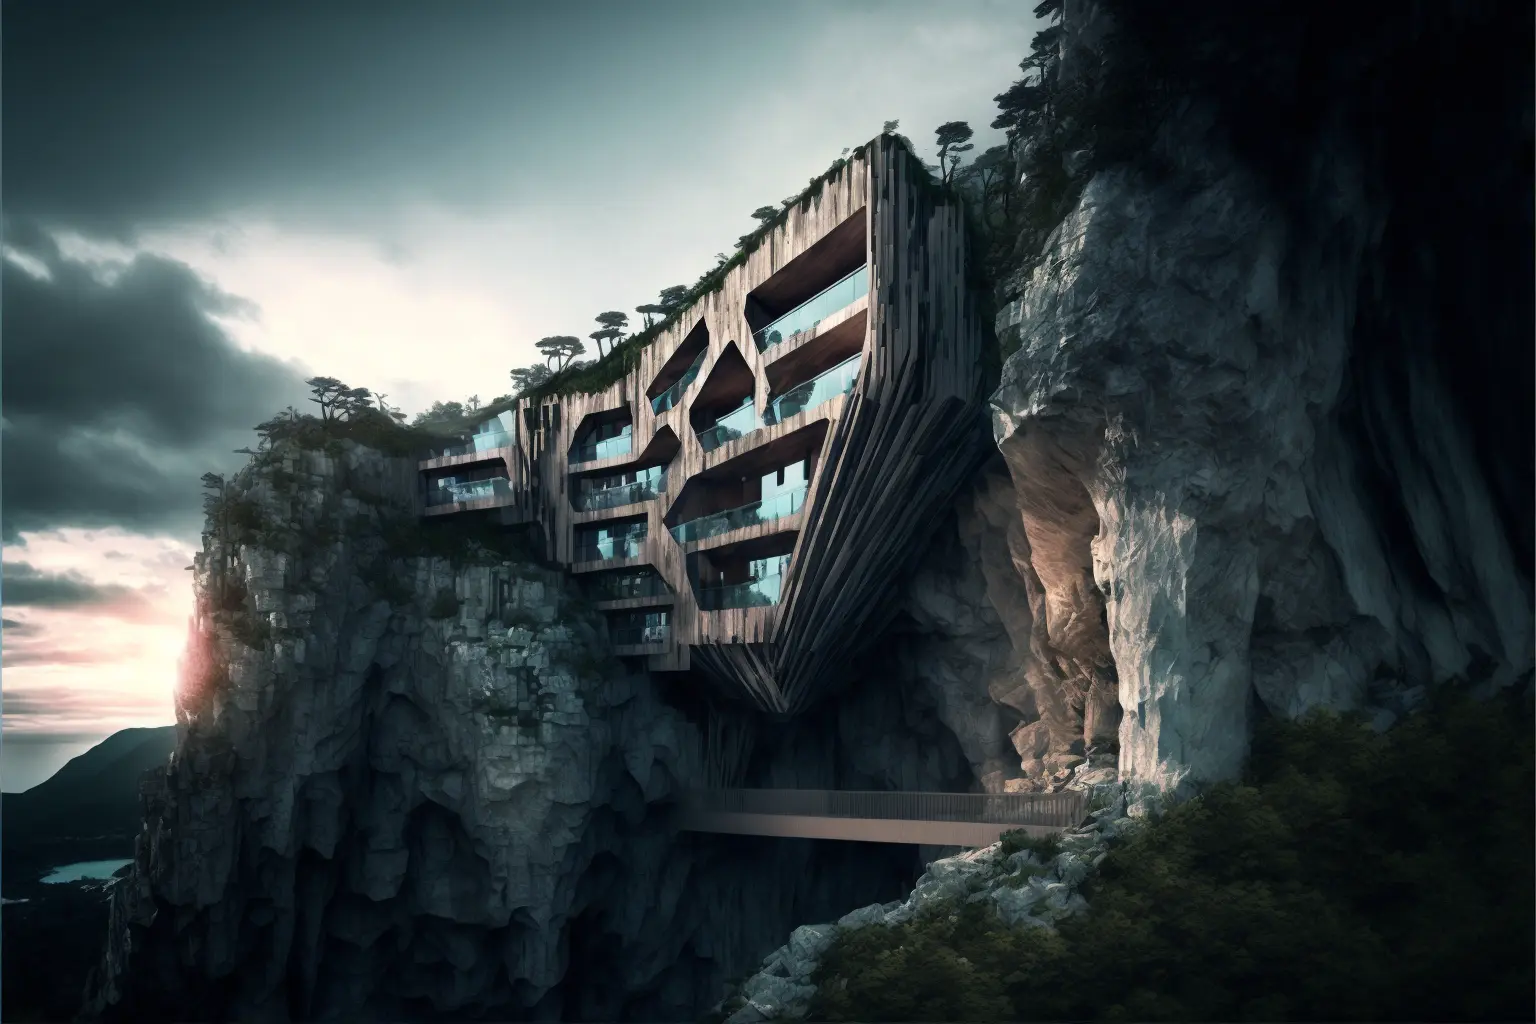 resort embed into a cliff designed by Kengo Kuma, architectural photography, style of archillect, futurism modernist architecture 